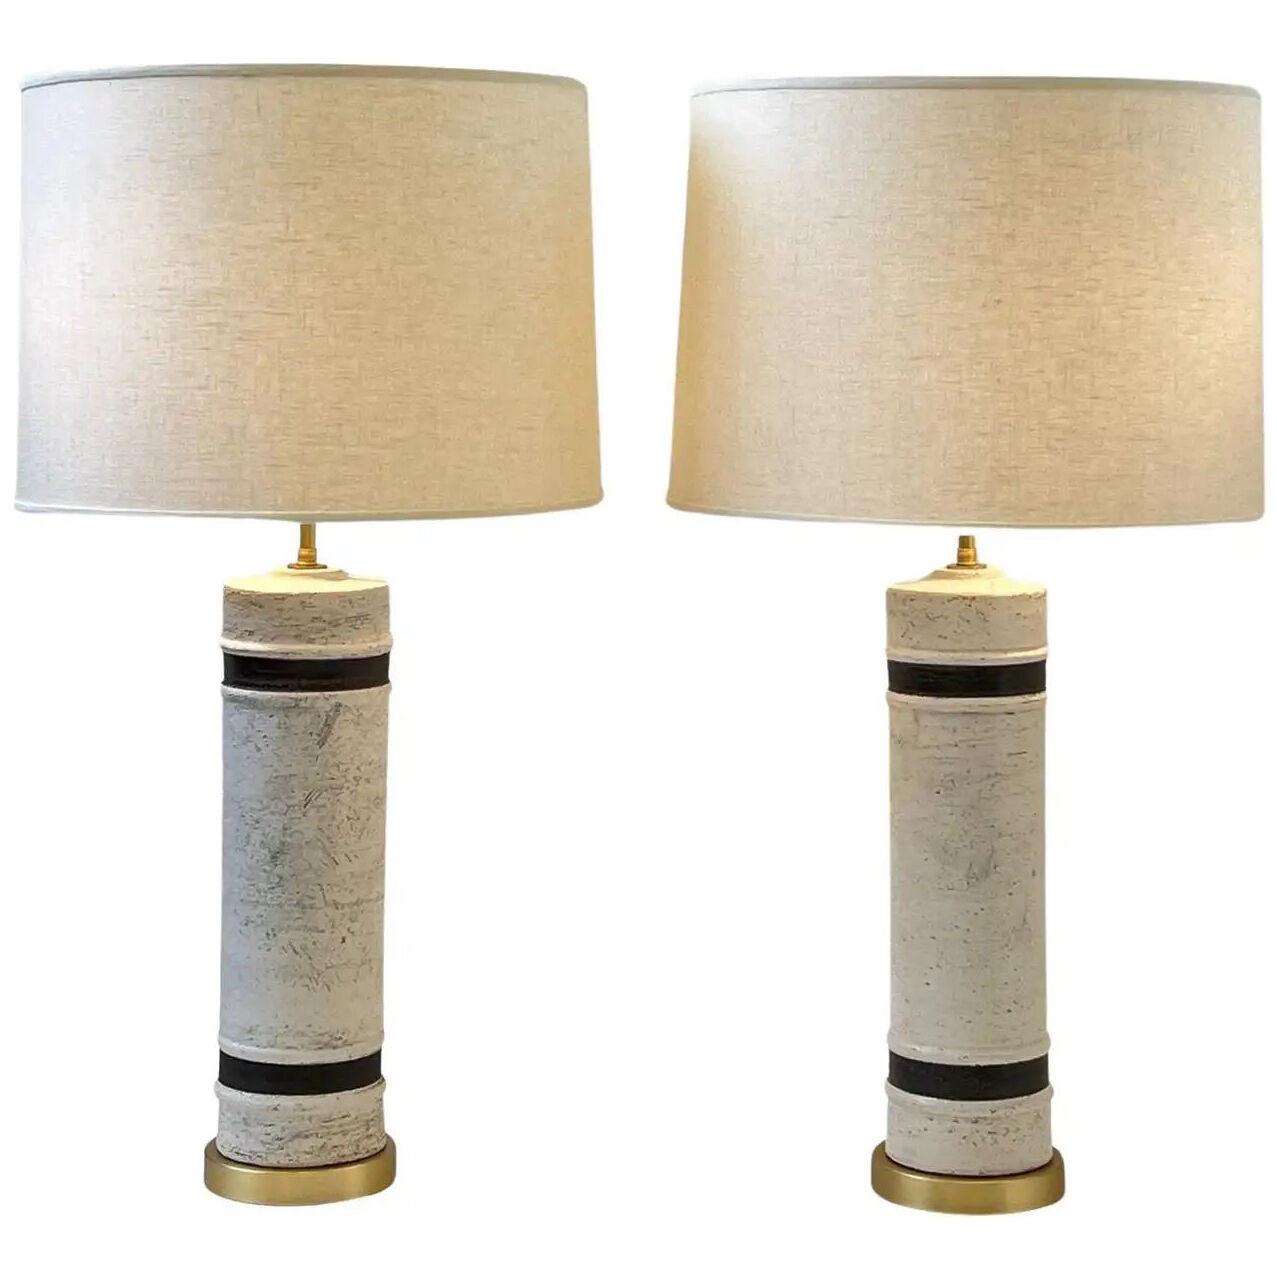 Pair of Italian Ceramic and Brass Table Lamps by Bitossi